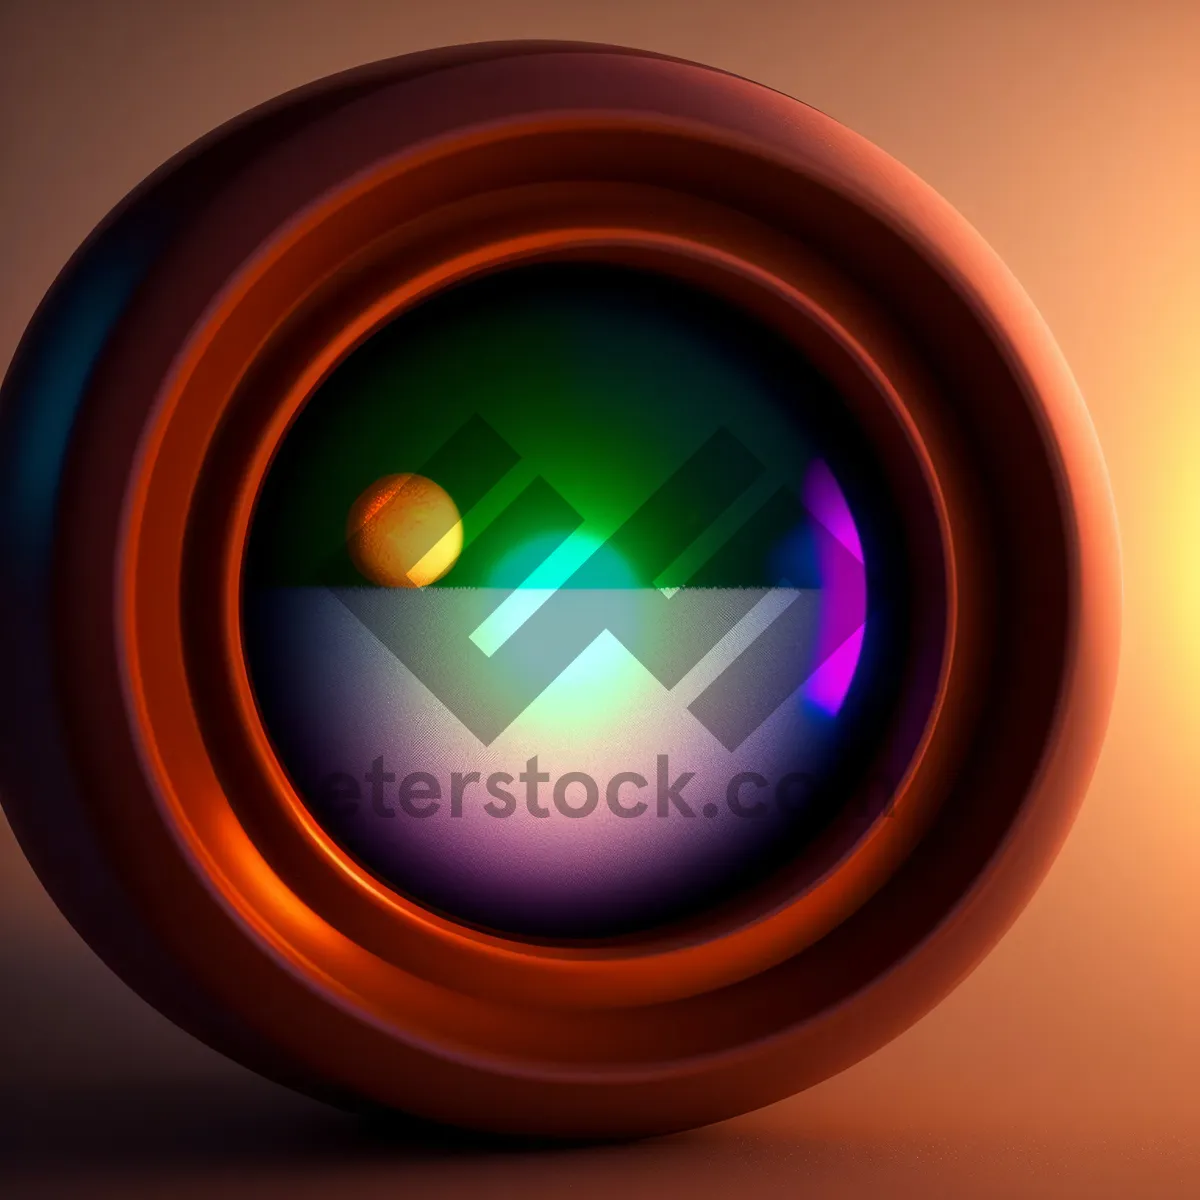 Picture of Blazing Button - Web Icon with Glossy Glass and Shiny Design